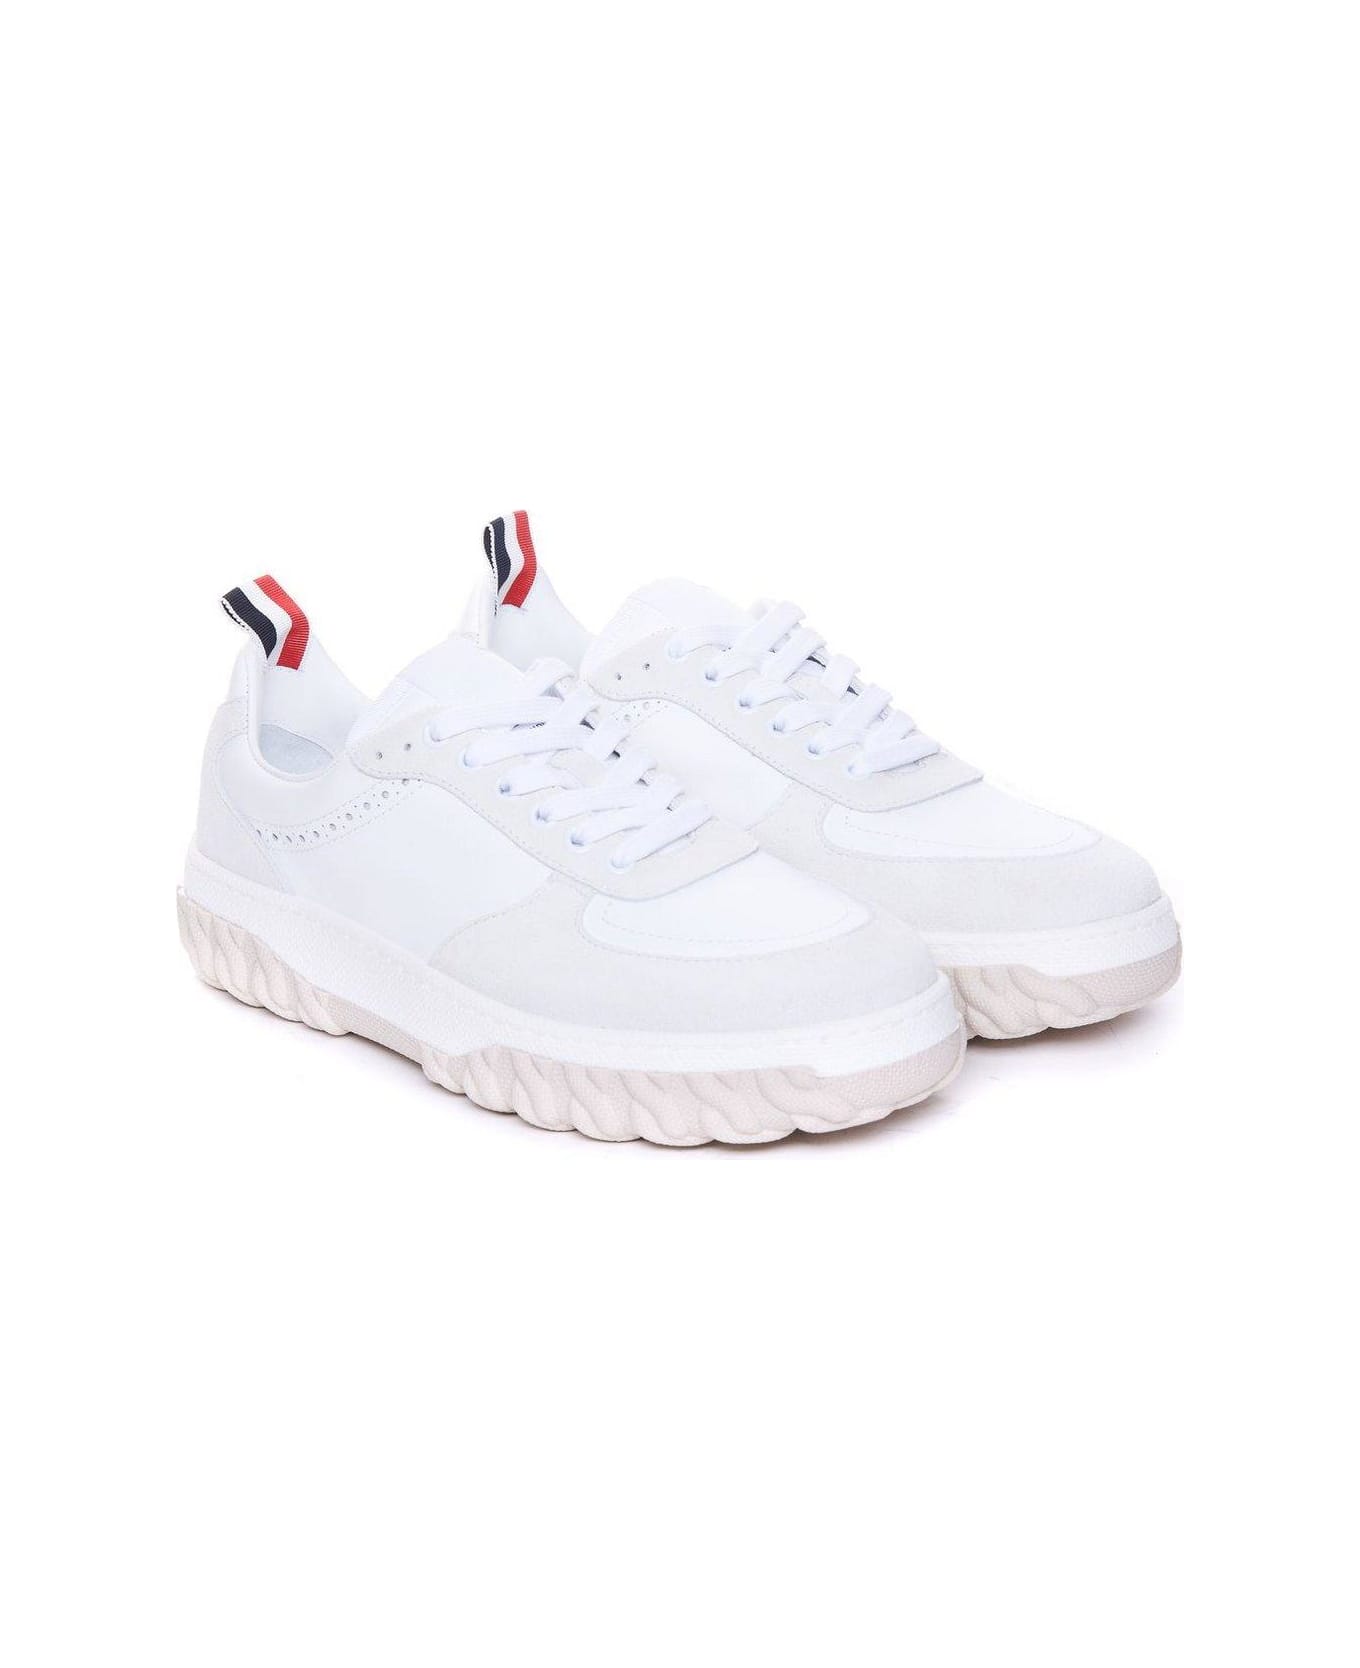 Thom Browne Letterman Panelled Low-top Sneakers - Tonal White Fun Mix スニーカー